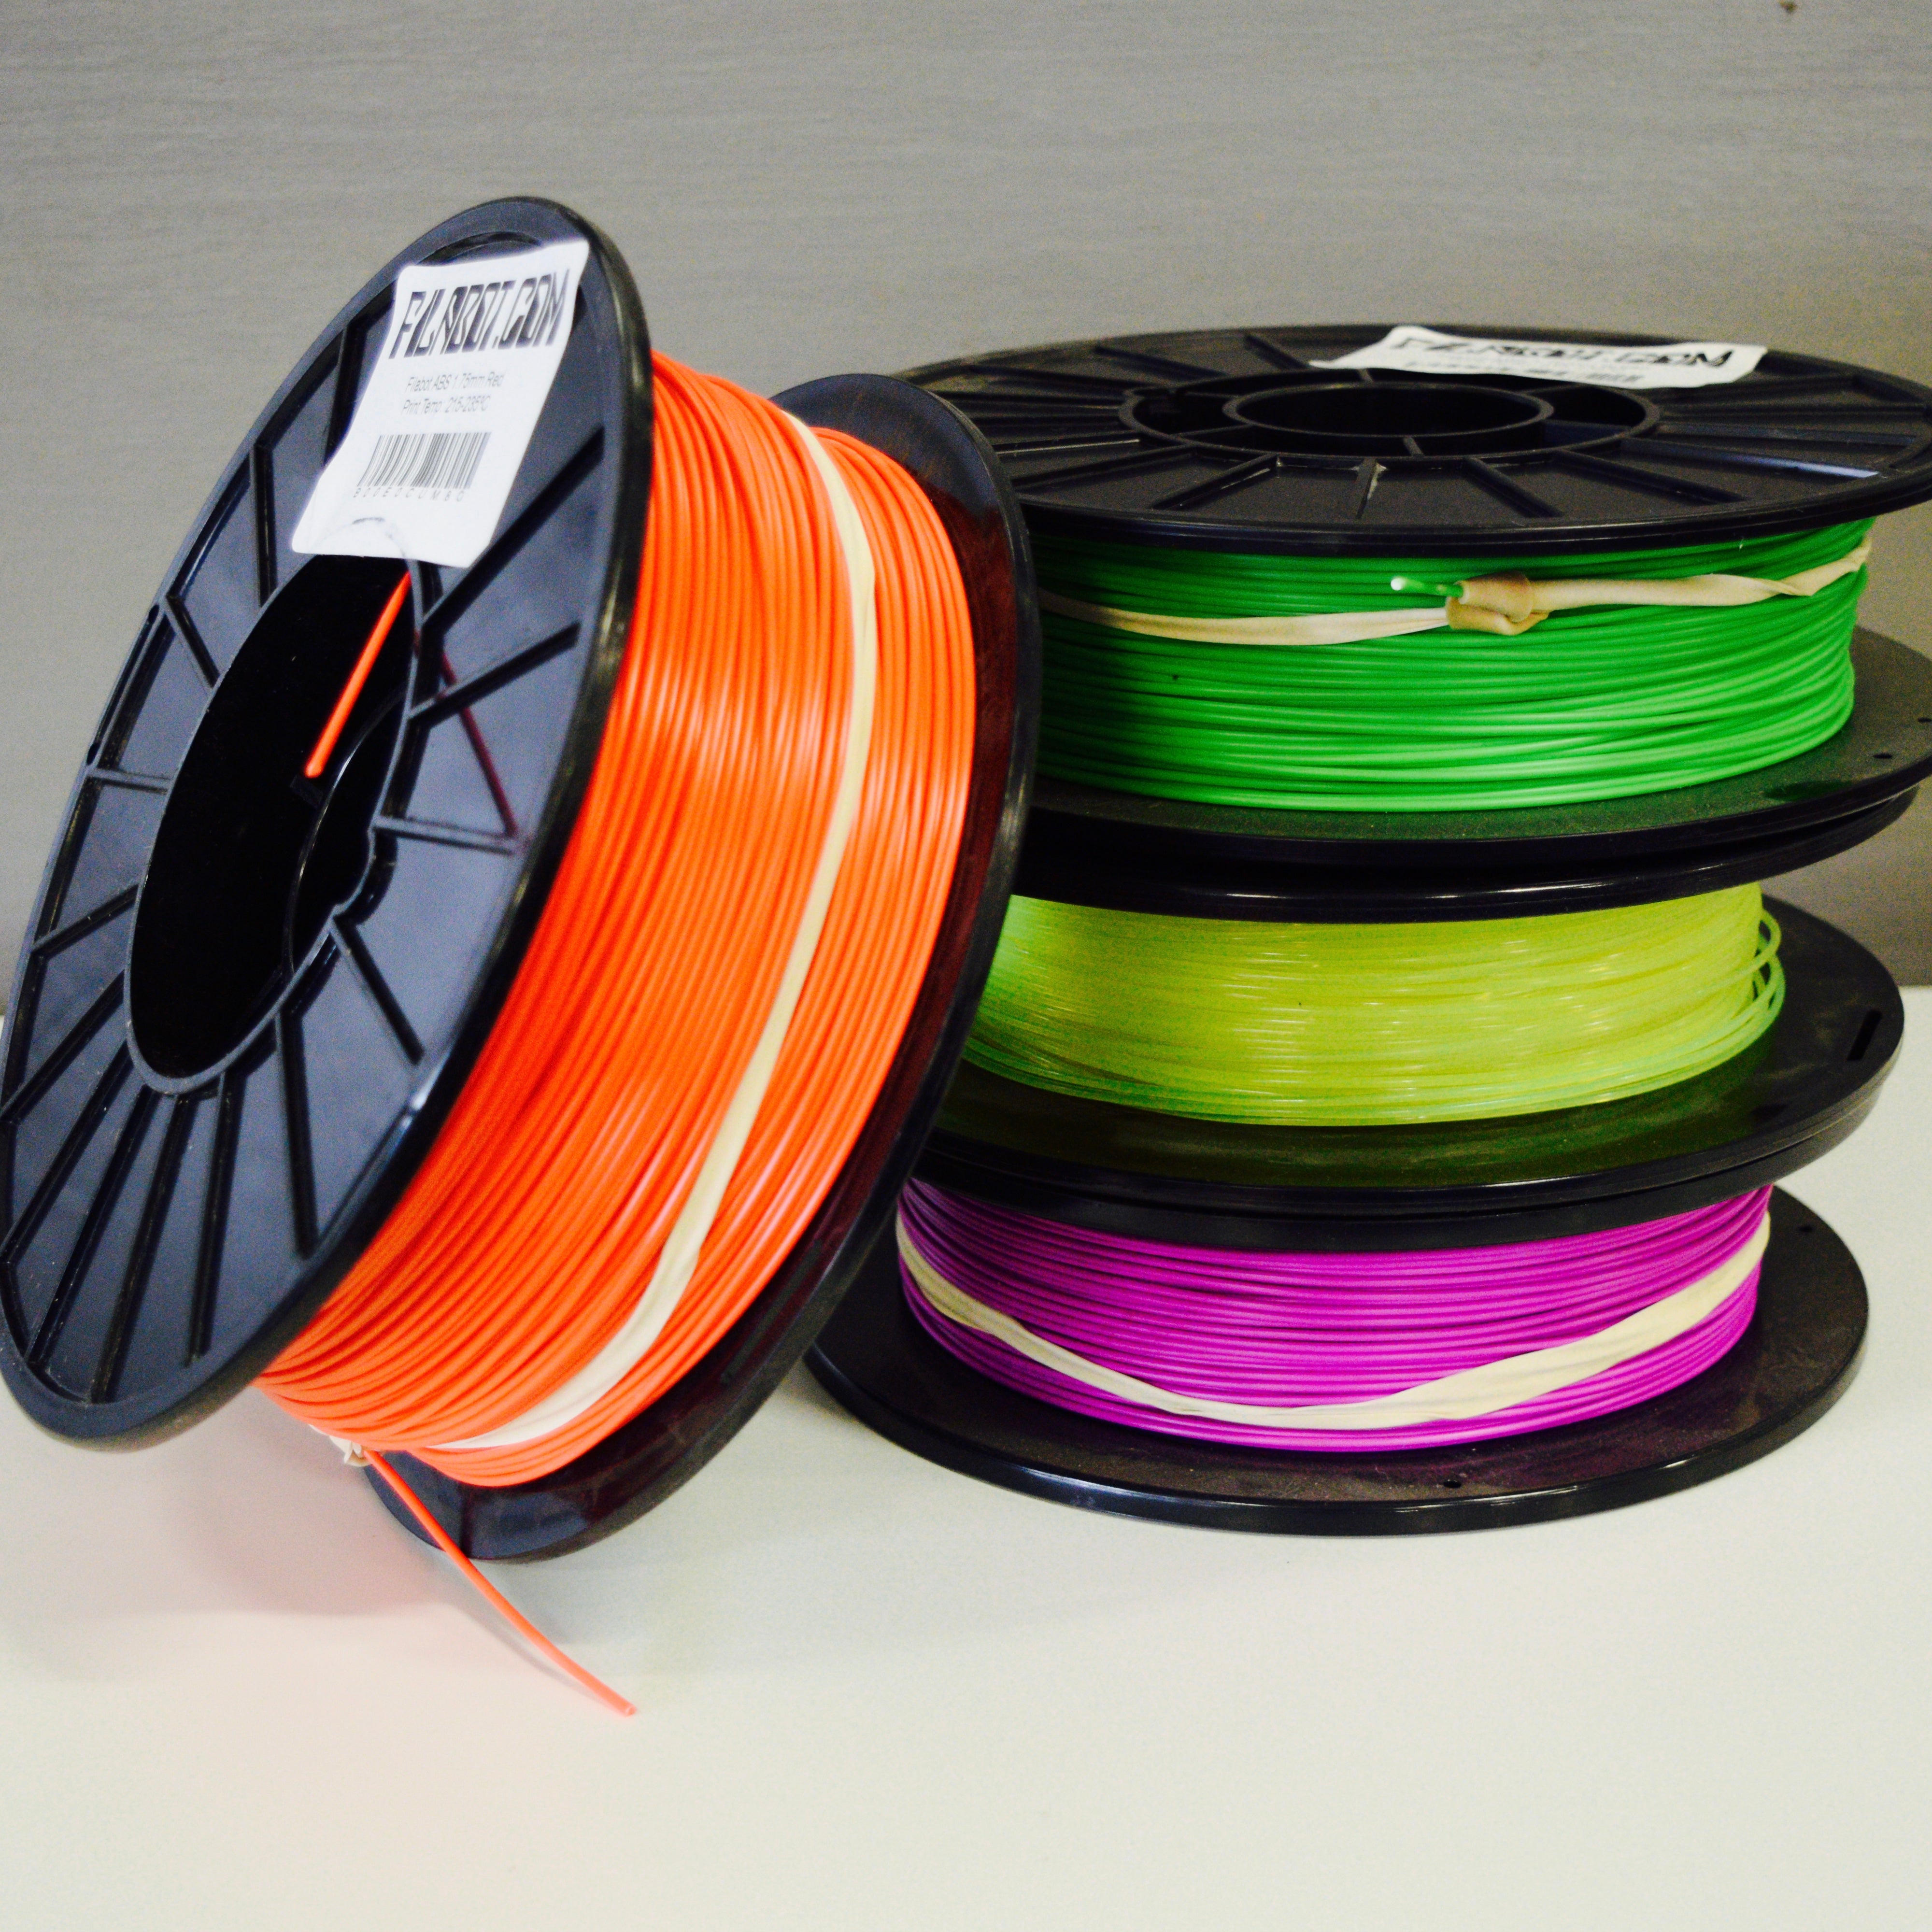 Polymer Property Considerations for Successful 3D Printing